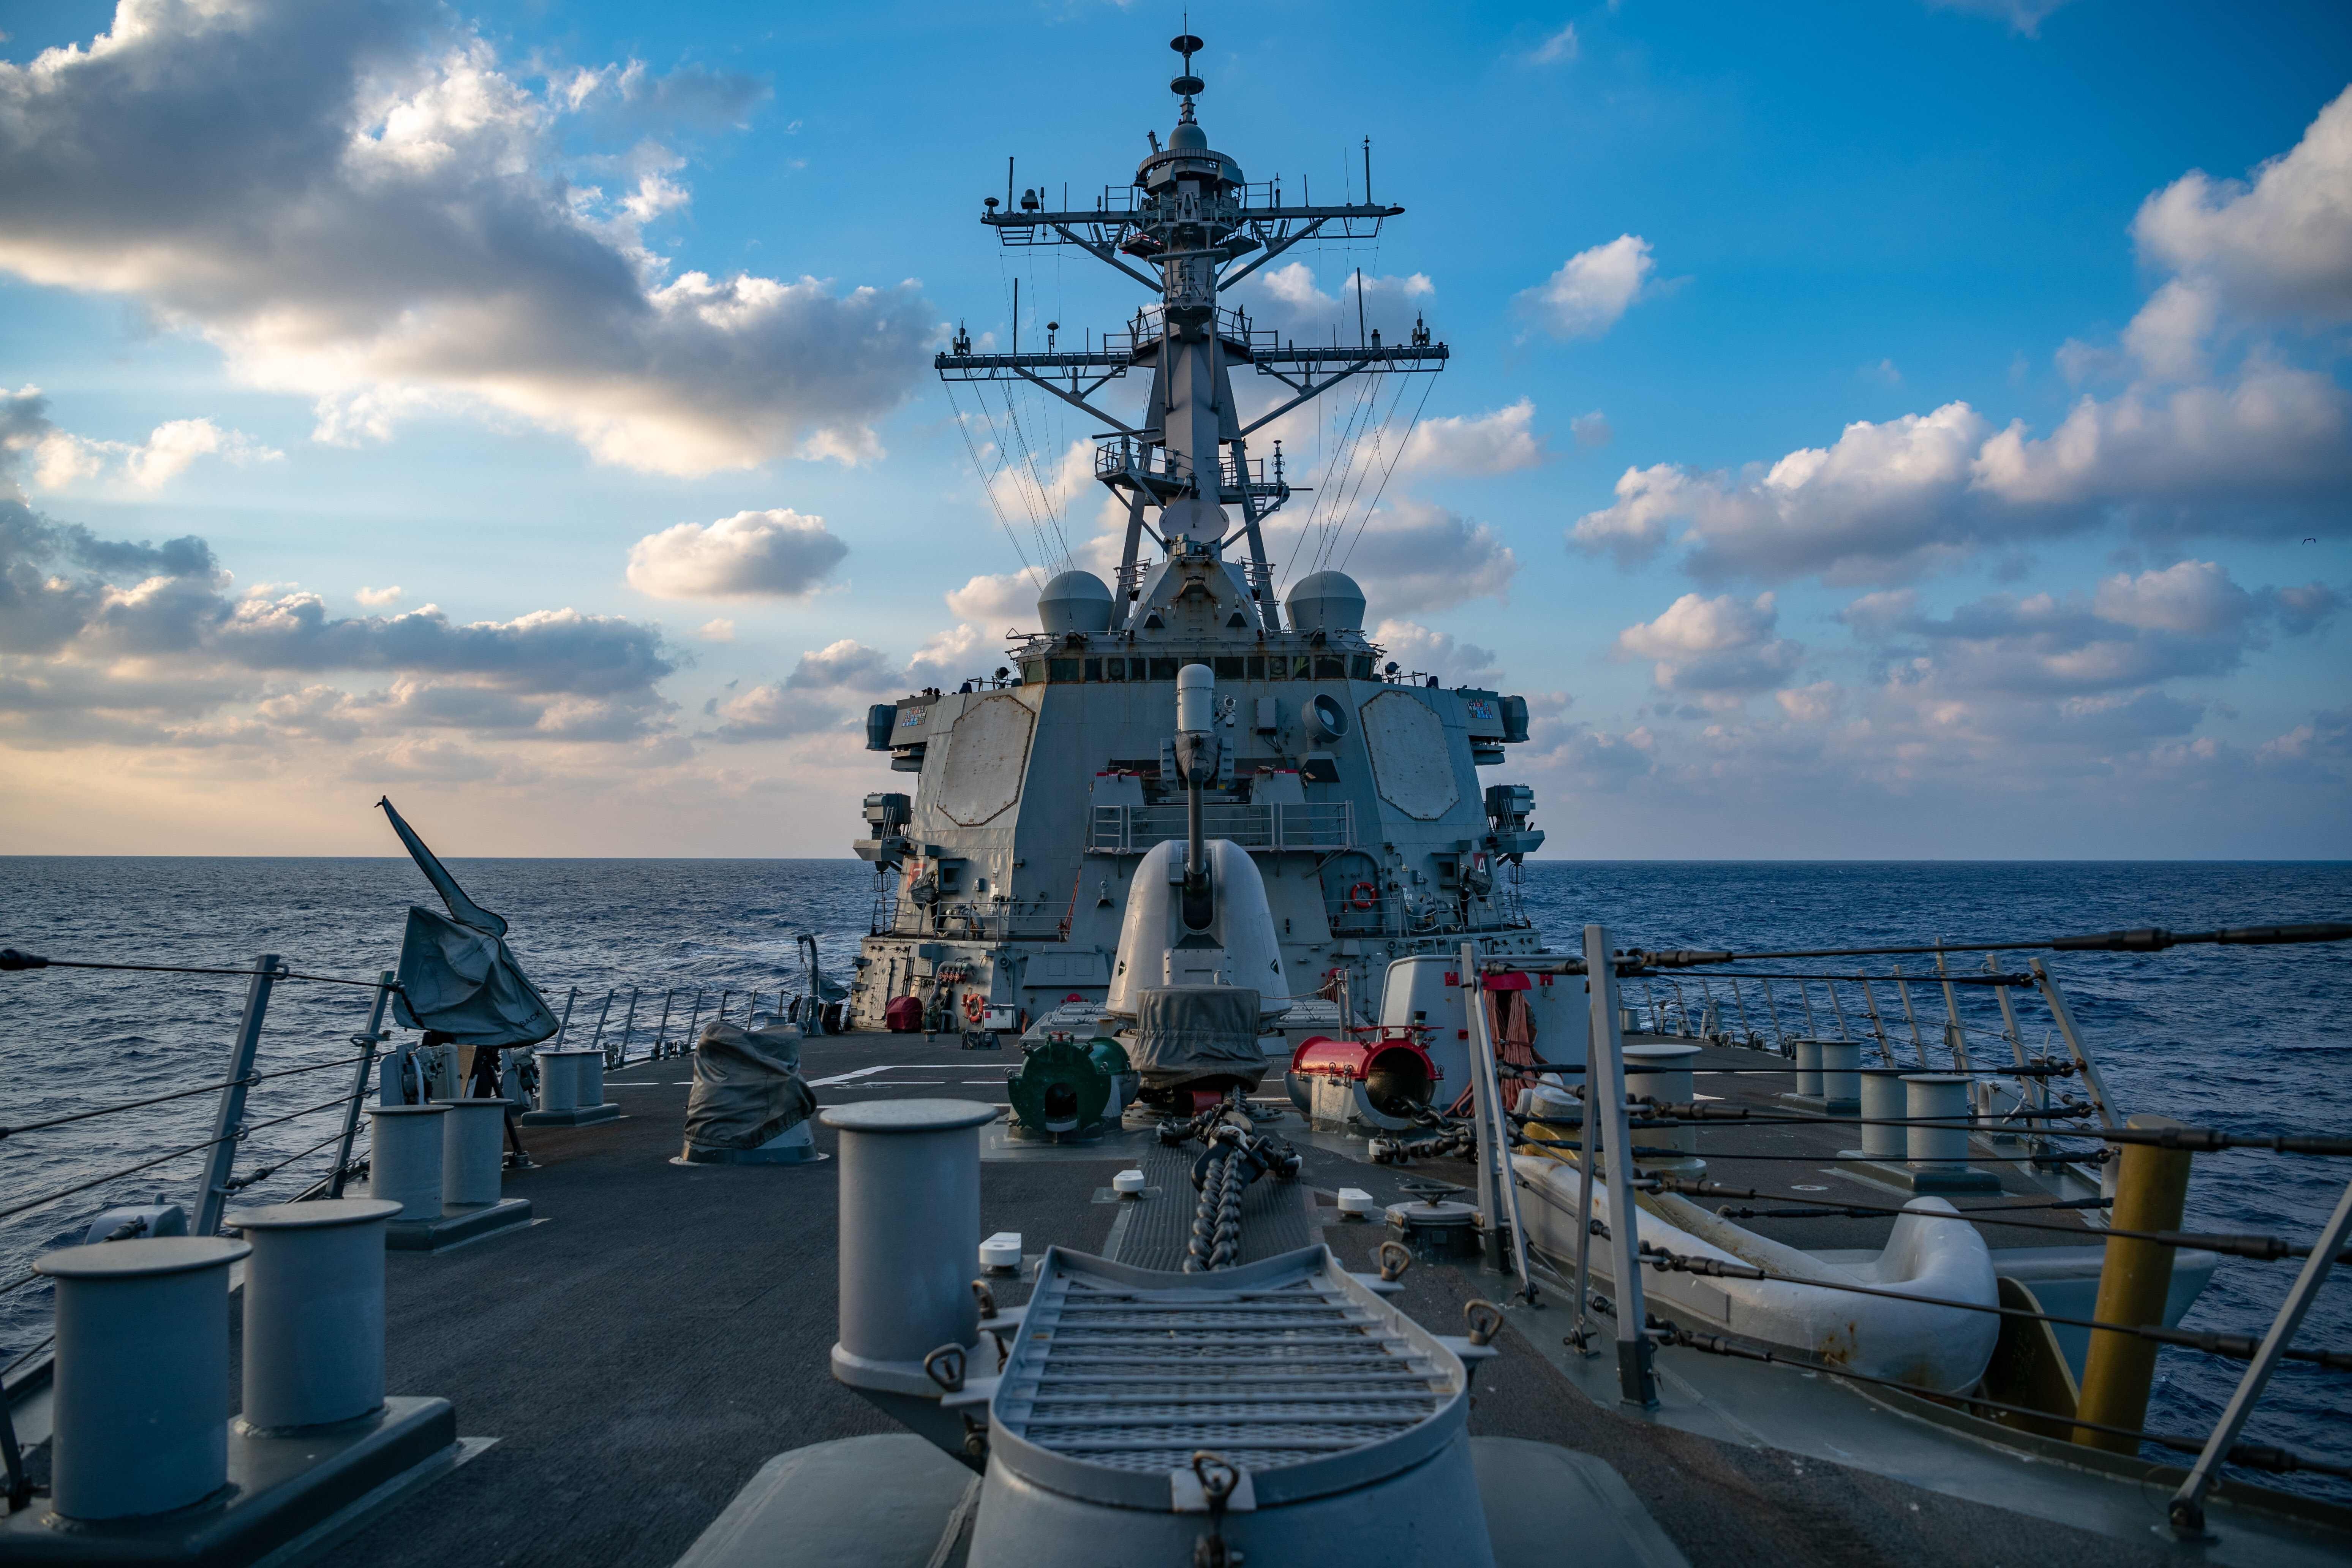 The US Navy’s Arleigh-Burke class guided-missile destroyer USS Barry conducting operations in the South China Sea on April 28. The disputed waters in the South China Sea are a potential flash point between China and the United States, but it would be inaccurate to describe the tensions as a new cold war. Photo: AFP